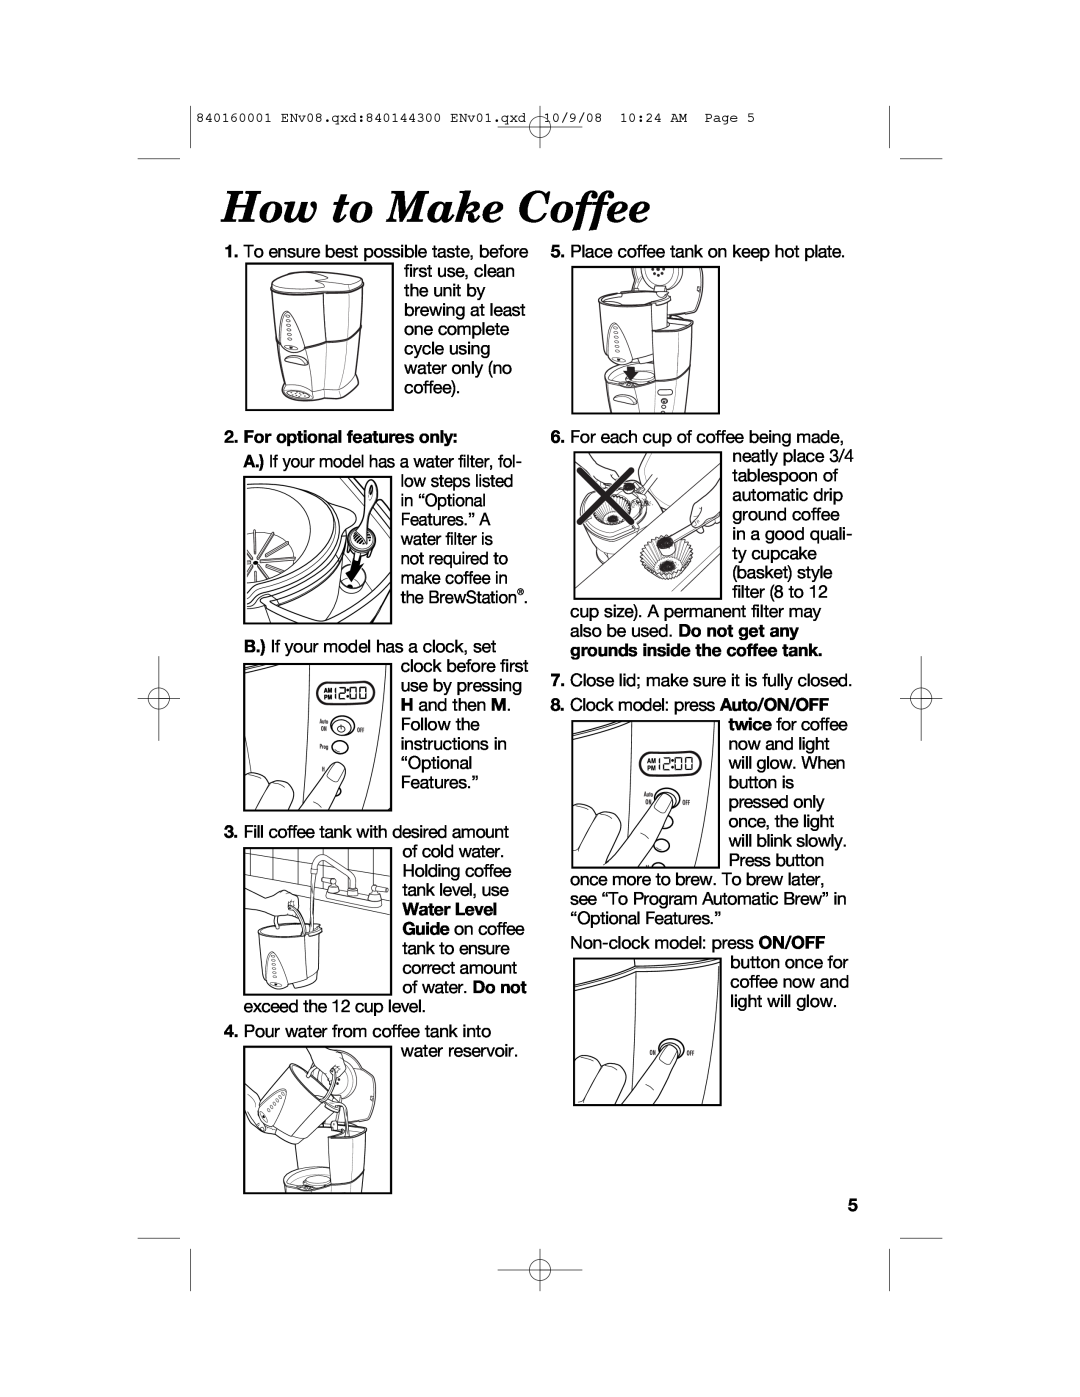 Hamilton Beach 47214 manual How to Make Coffee, For optional features only, Water Level 